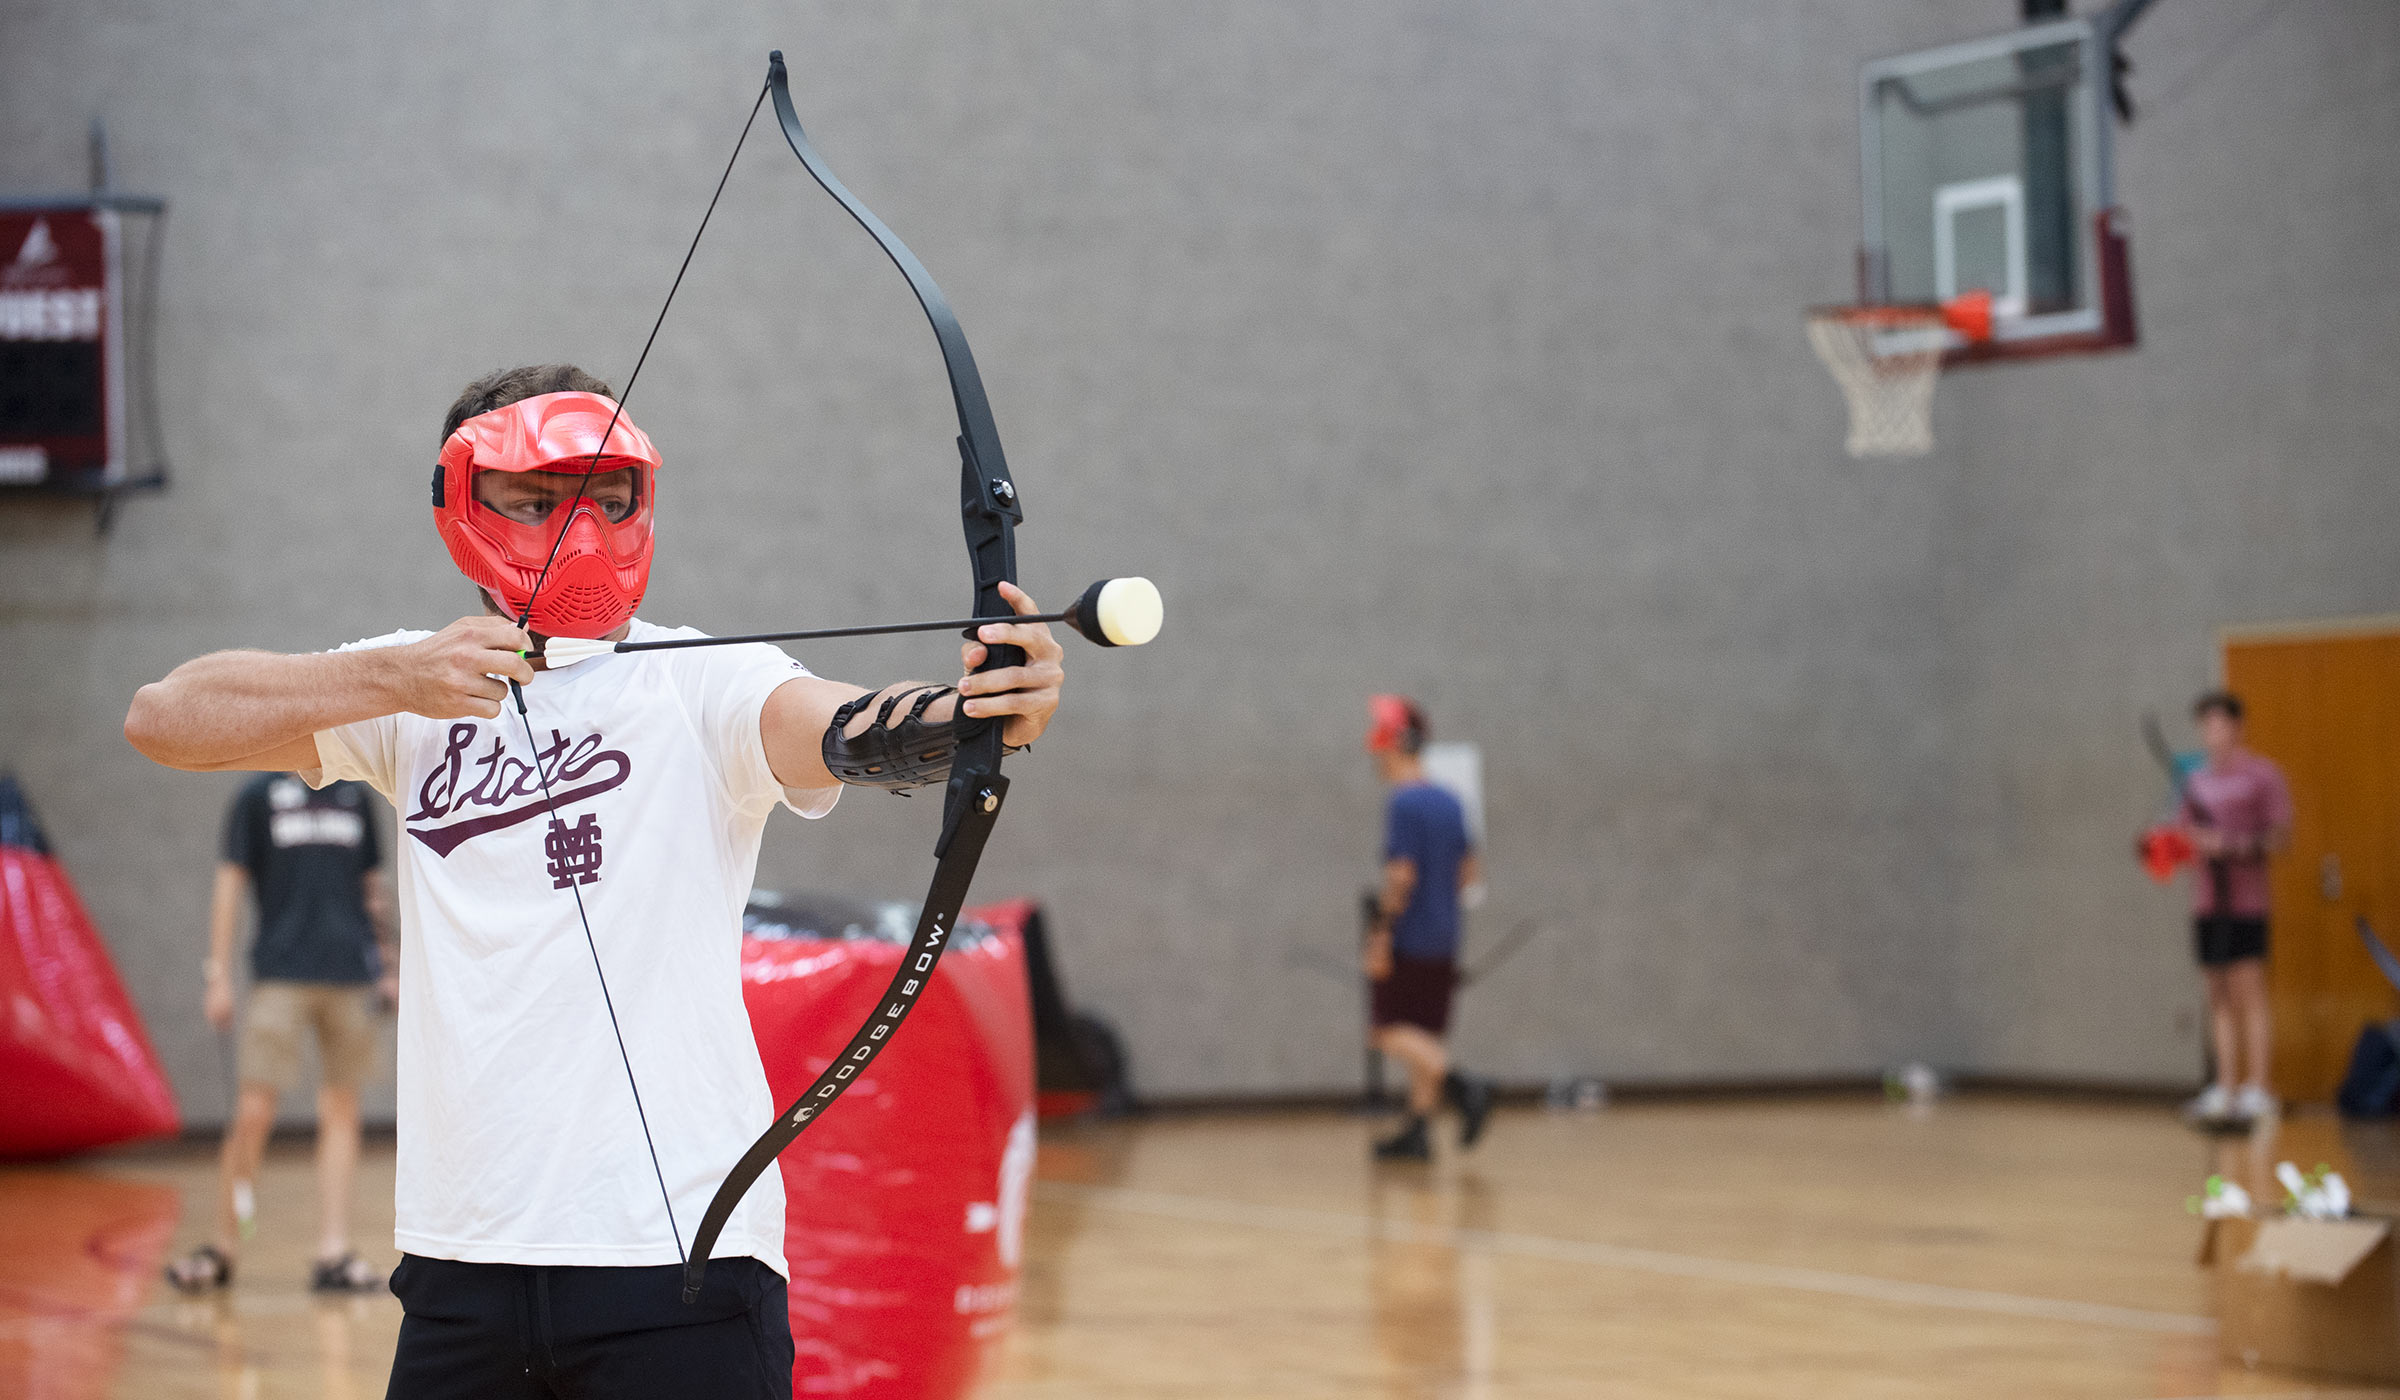 Student in helmet and white t-shirt with scripted state across front aiming foam arrow in gym